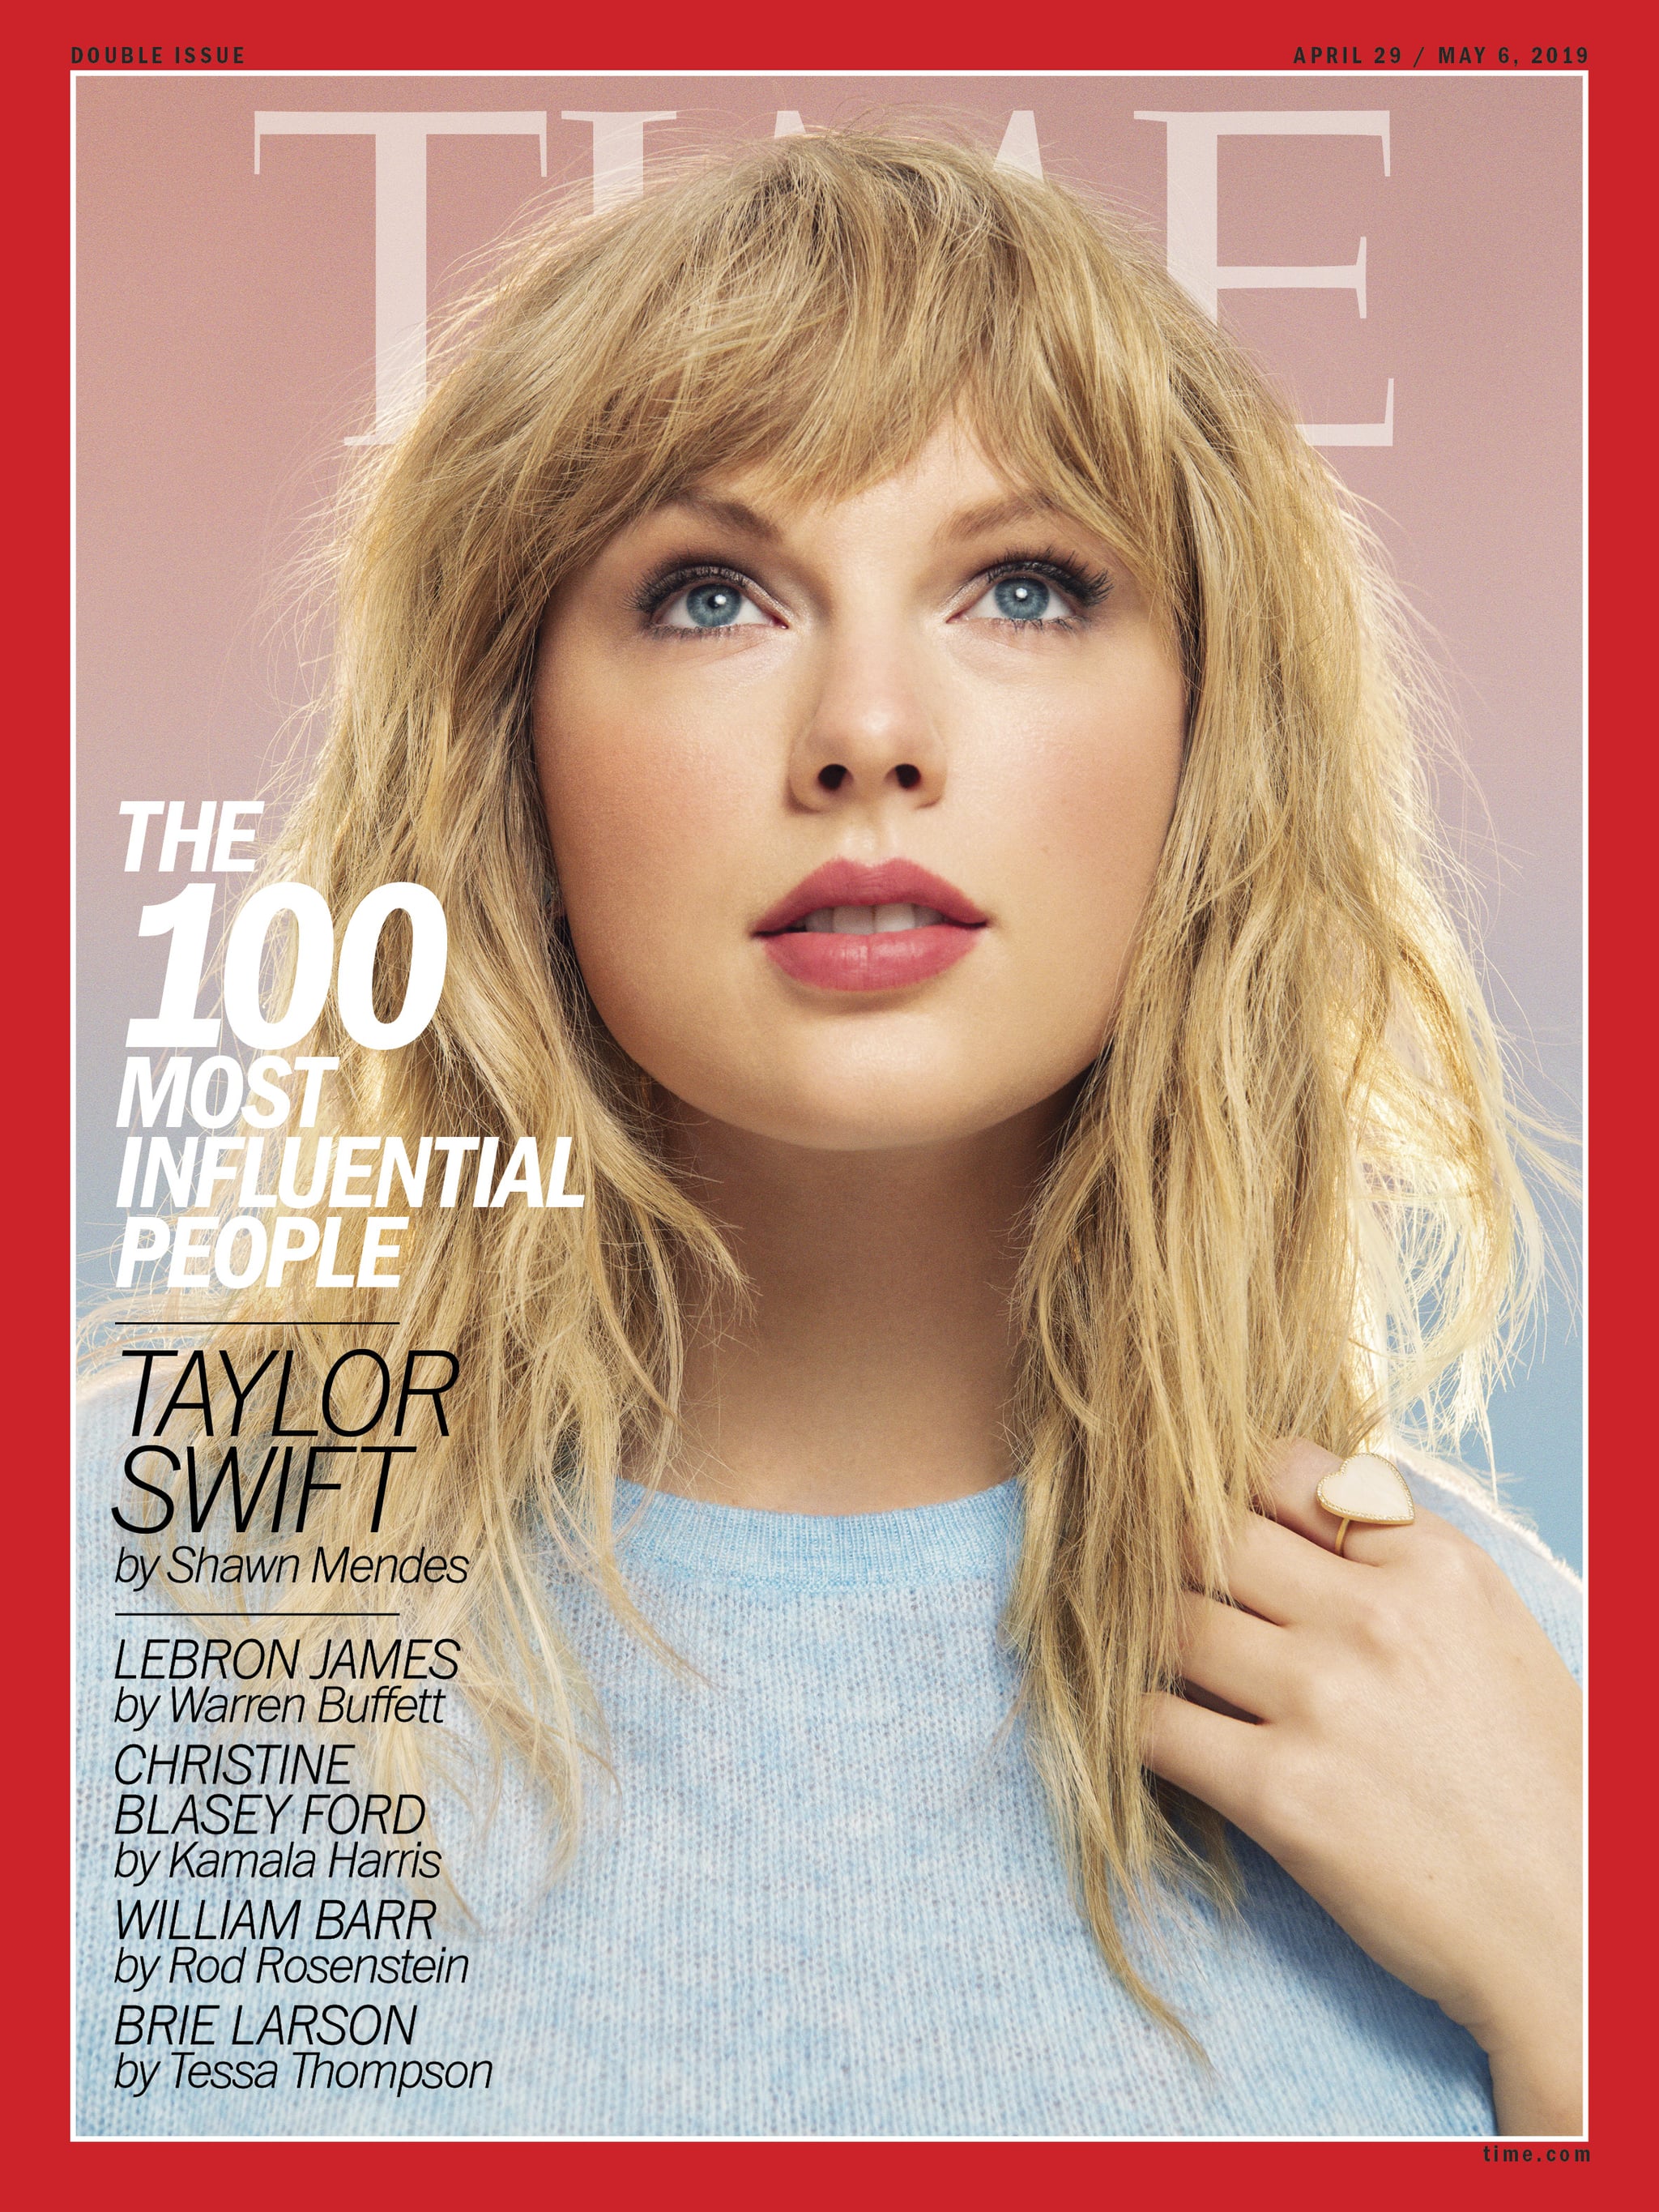 Beautiful Famous Singer Taylor Swift Modeling For TIME Magazine Modeling As One Of The Highest Paid Singers In The World.